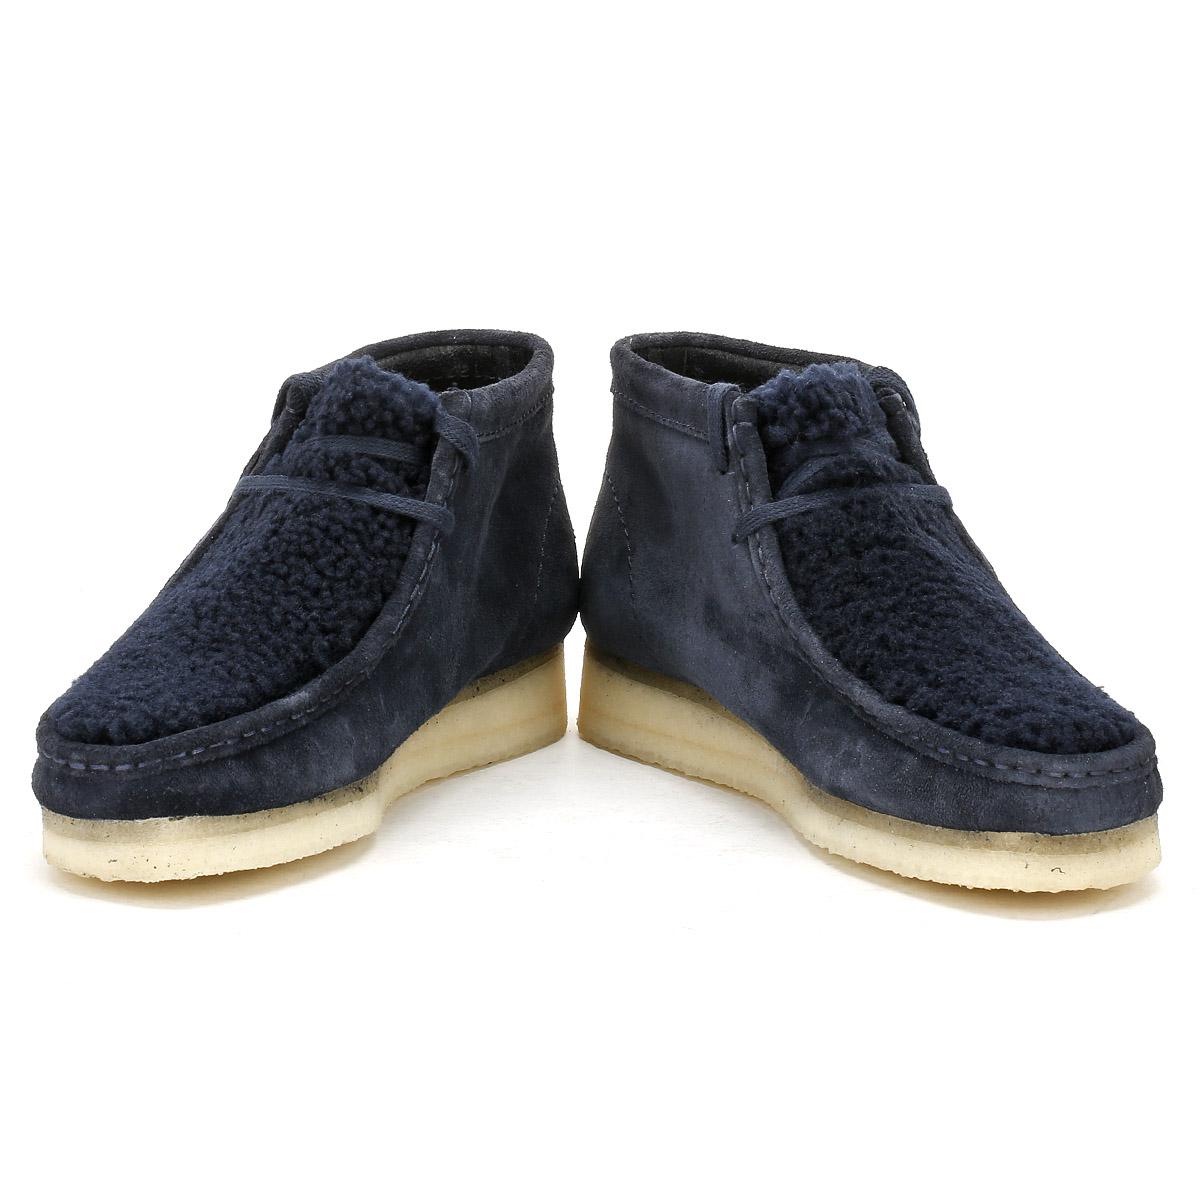 clarks womens navy boots